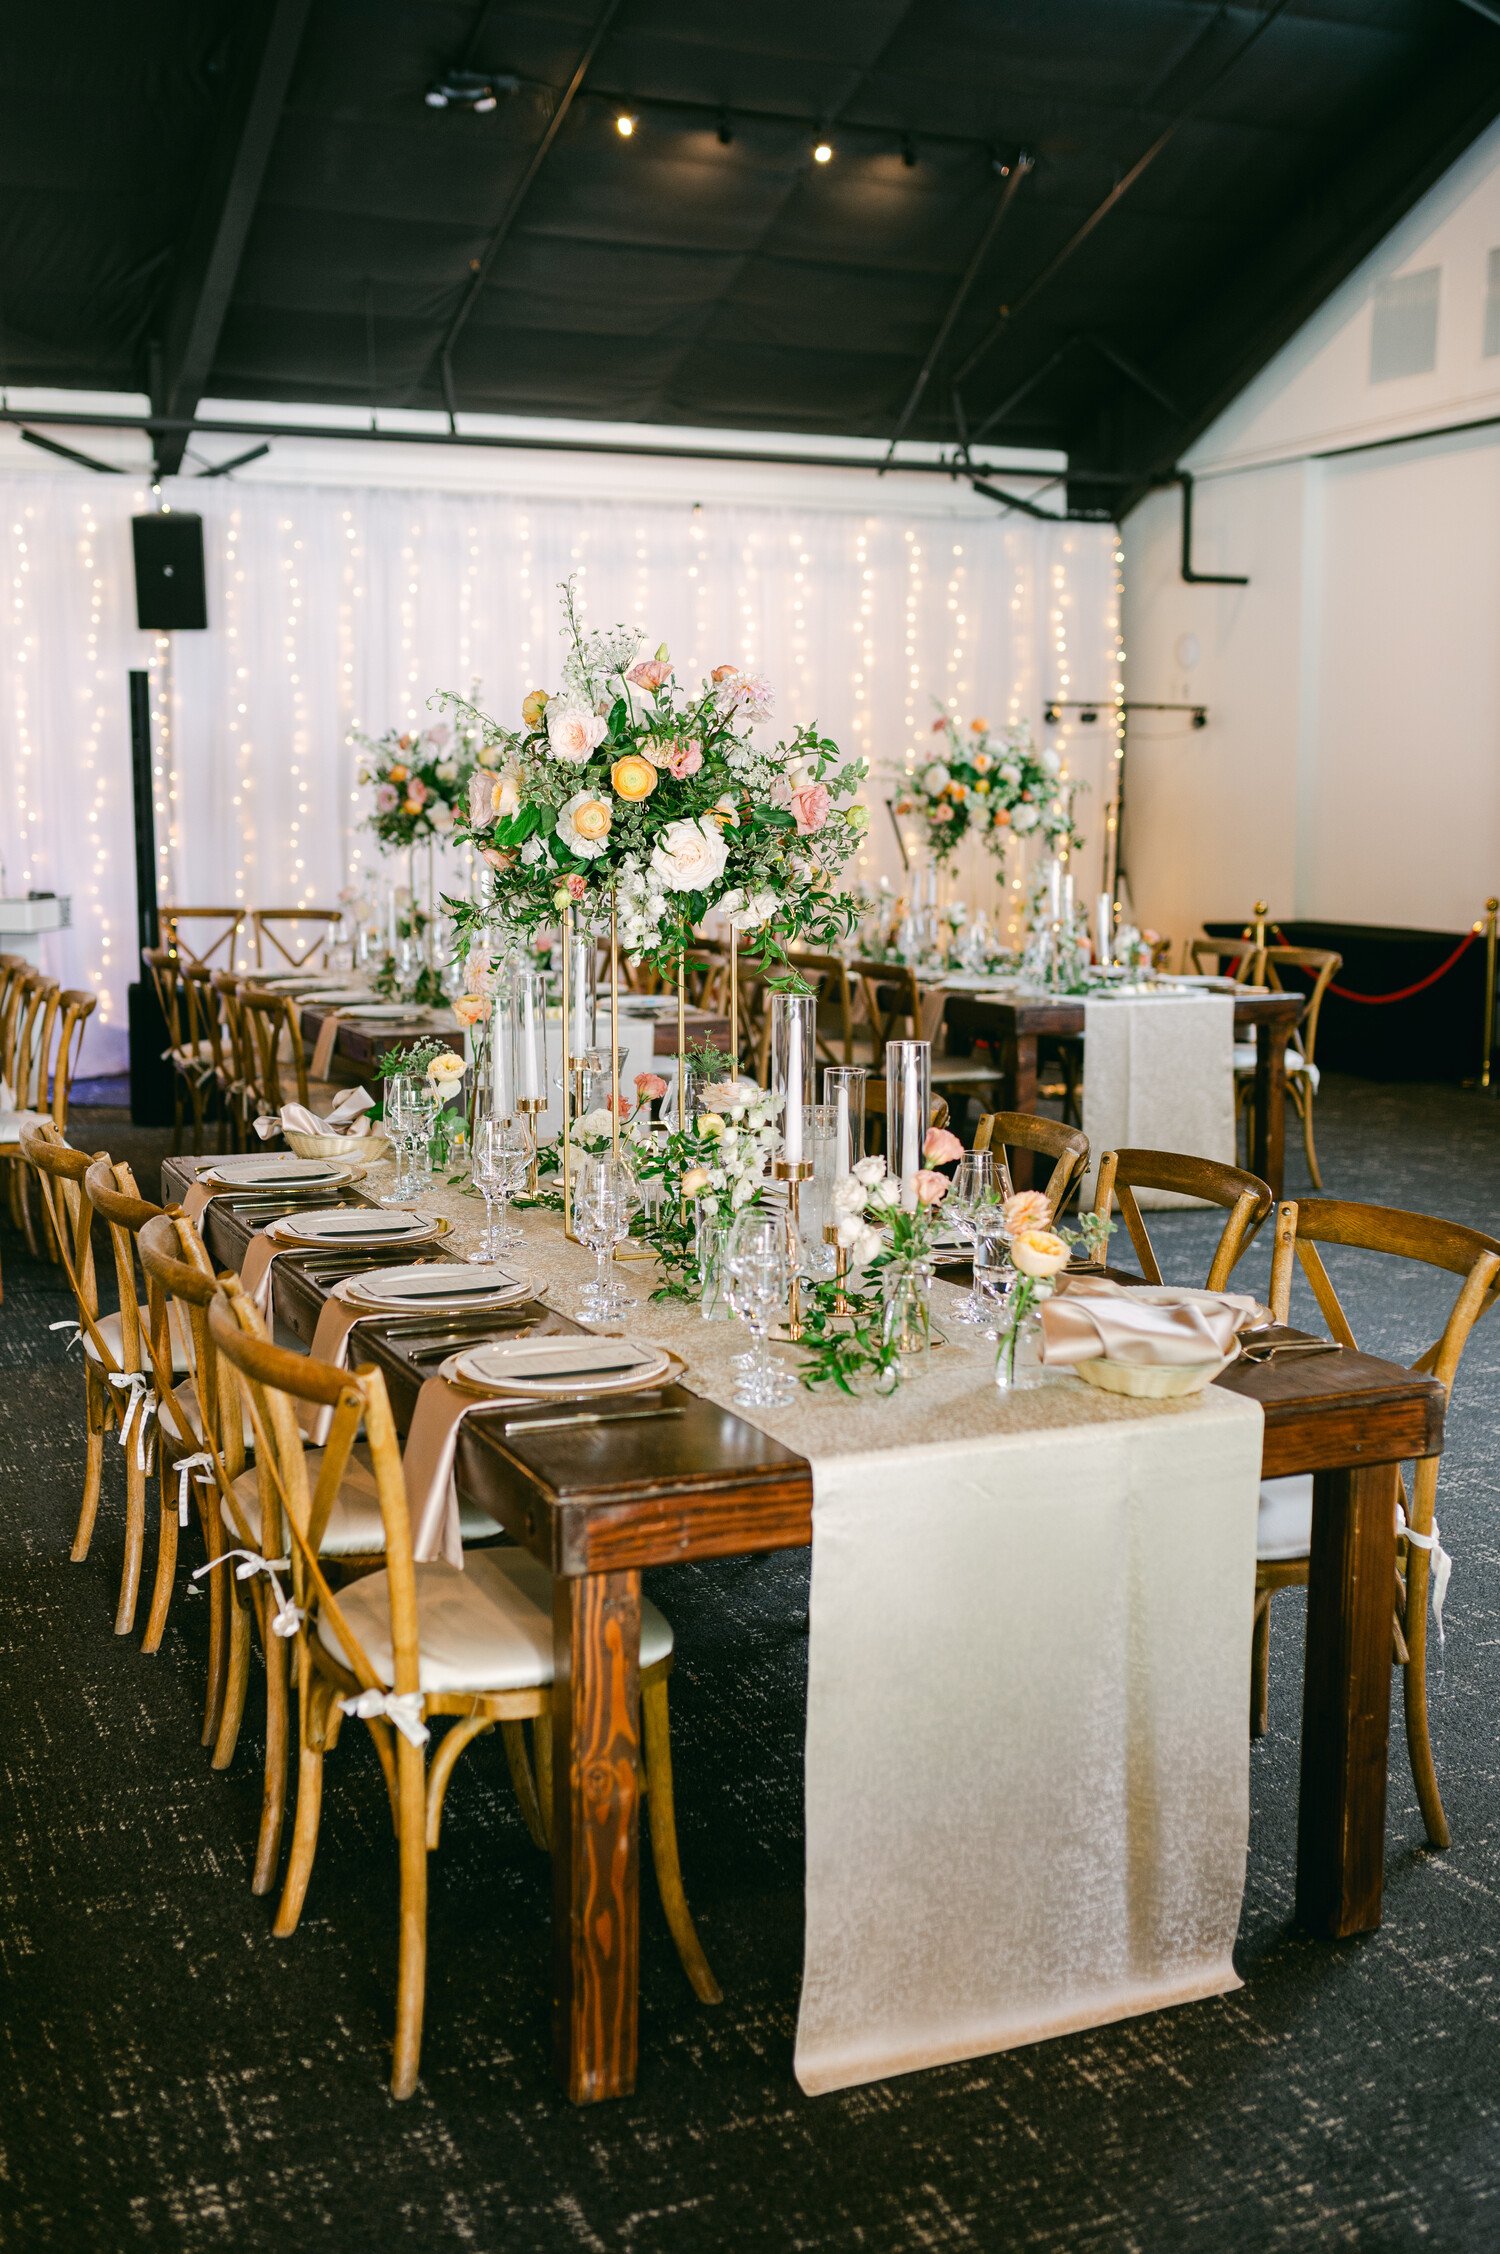 Elm Estate Wedding photos, photo of the wedding reception table set up with ethereal flowers